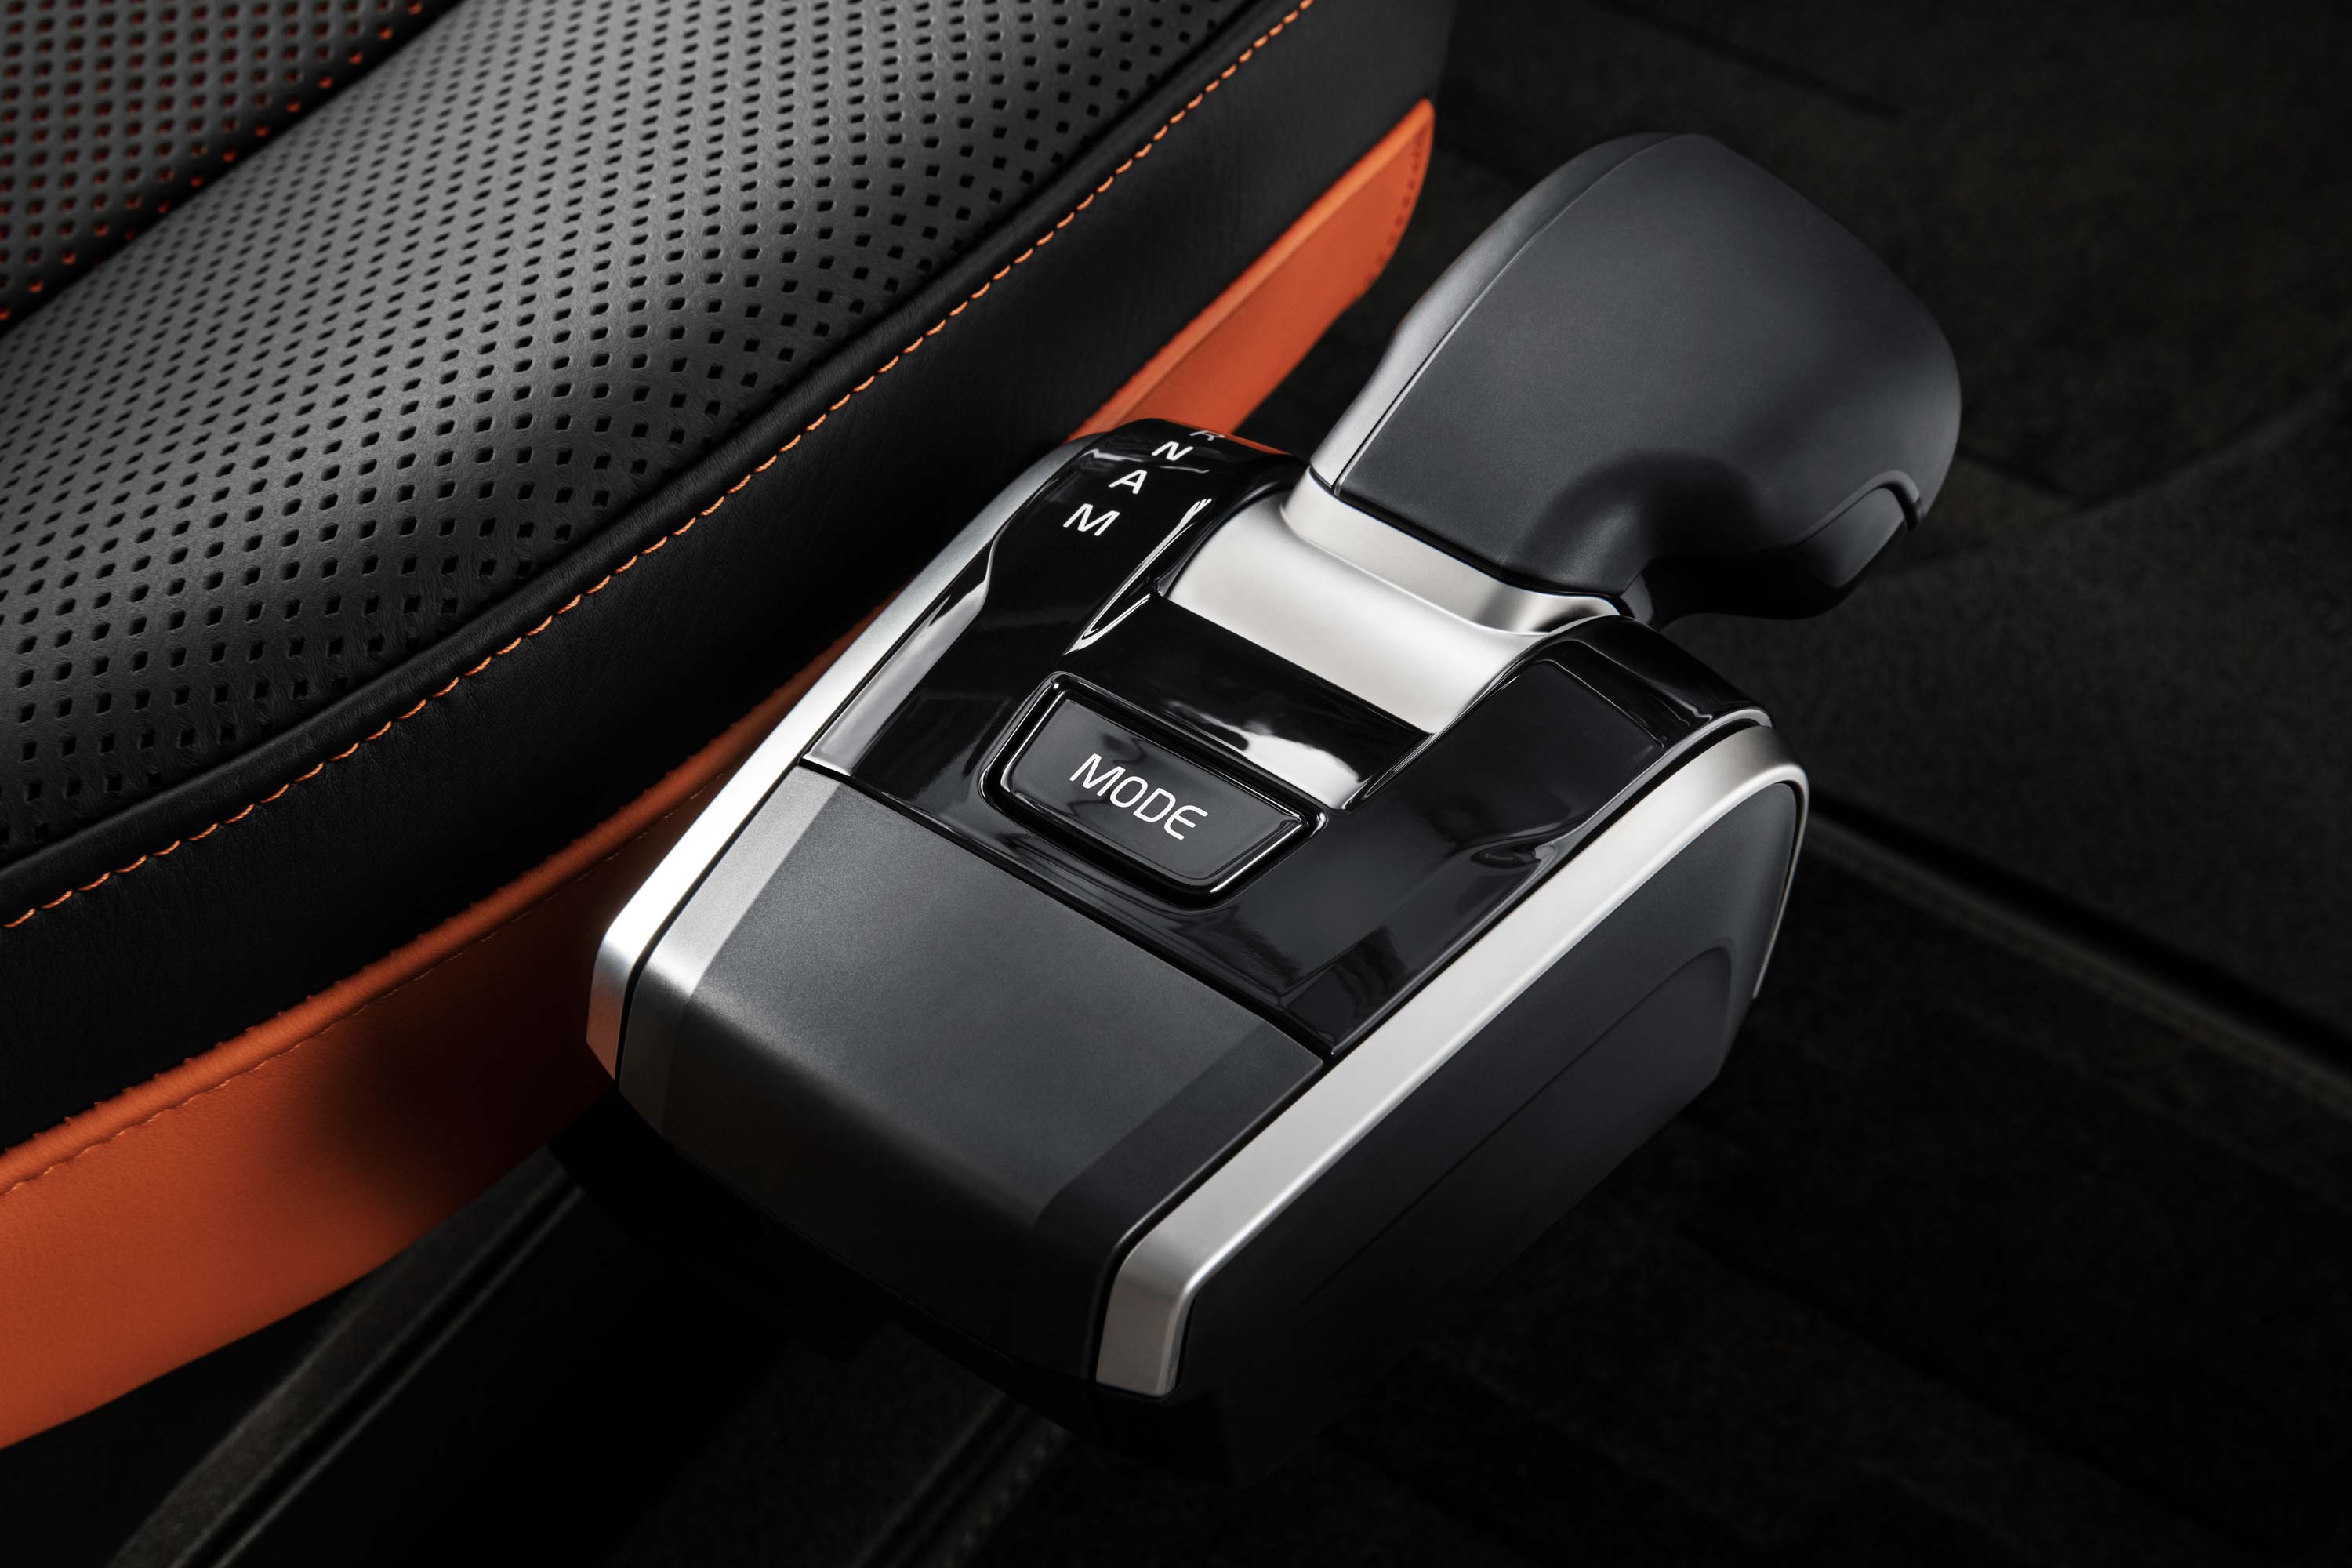 The I-Shift gear lever is integrated in the driver seat.